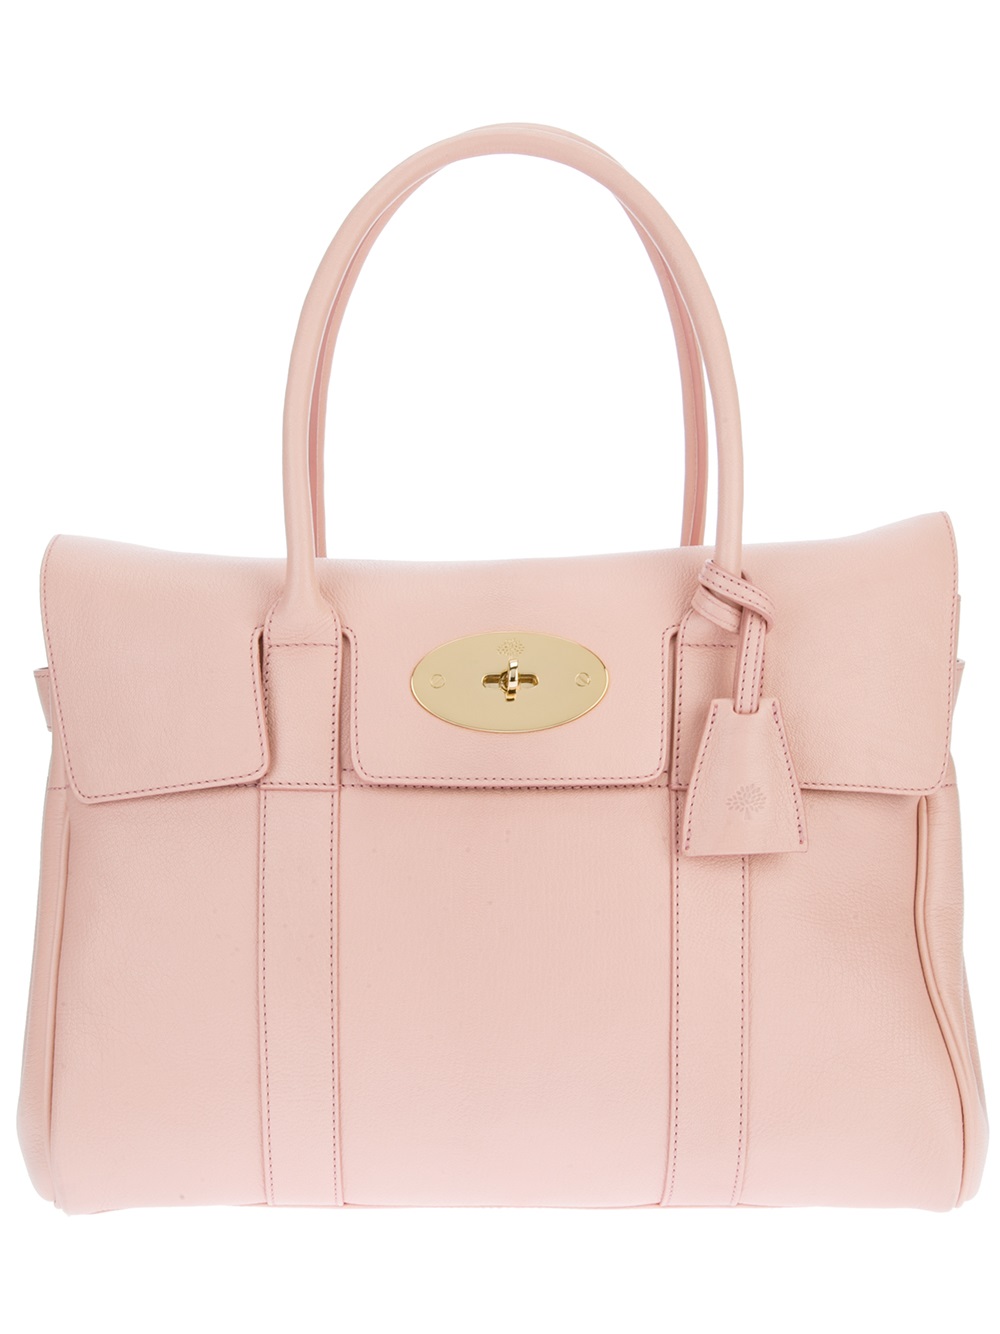 Lyst - Mulberry Bayswater Bag in Pink